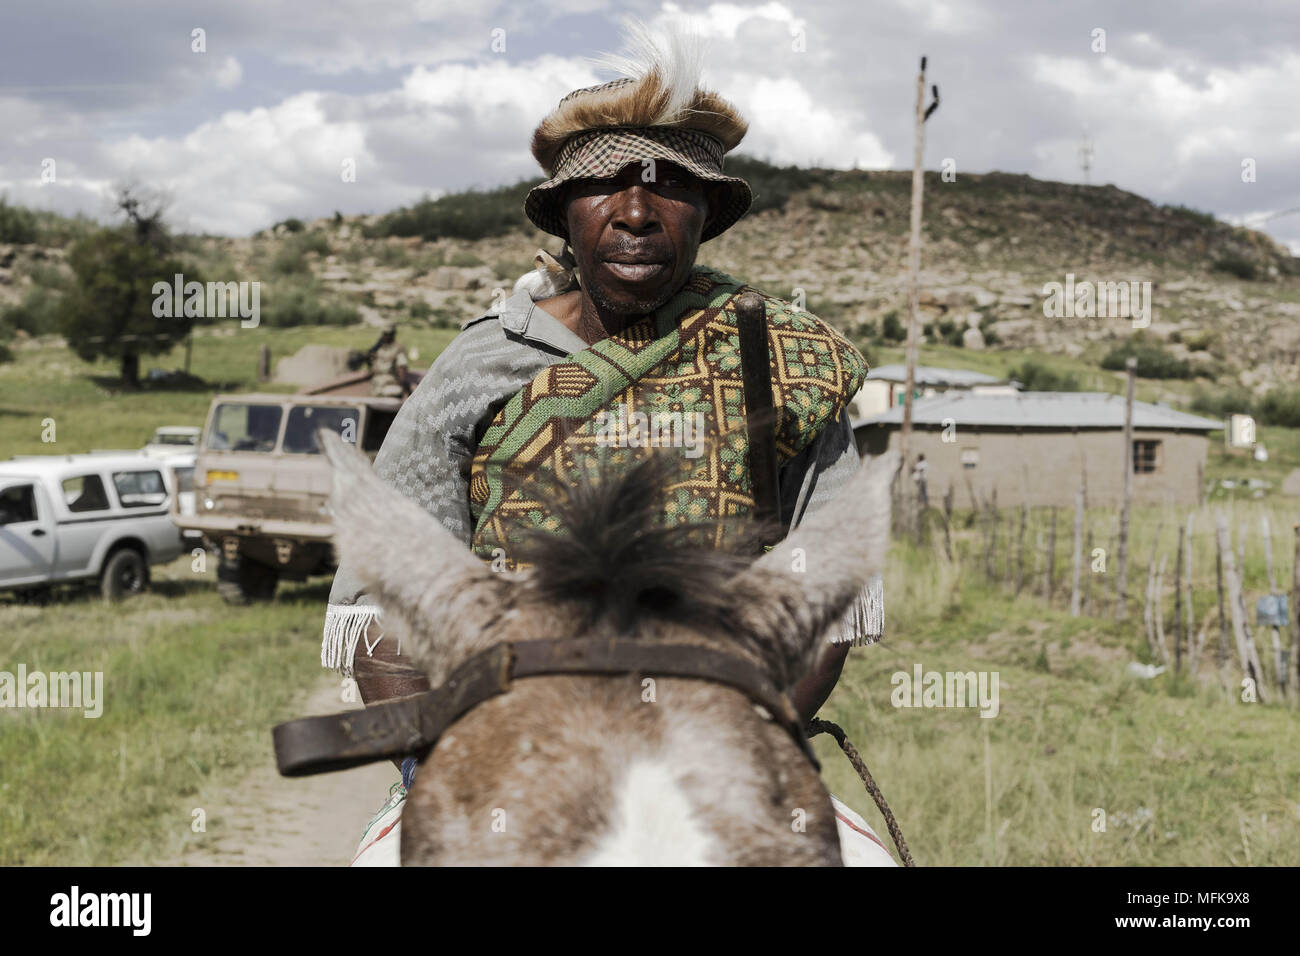 Matatiele, Eastern Cape, South Africa. 5th Jan, 2018. A Xhosa man sits on his horse. Credit: Stefan Kleinowitz/ZUMA Wire/Alamy Live News Stock Photo